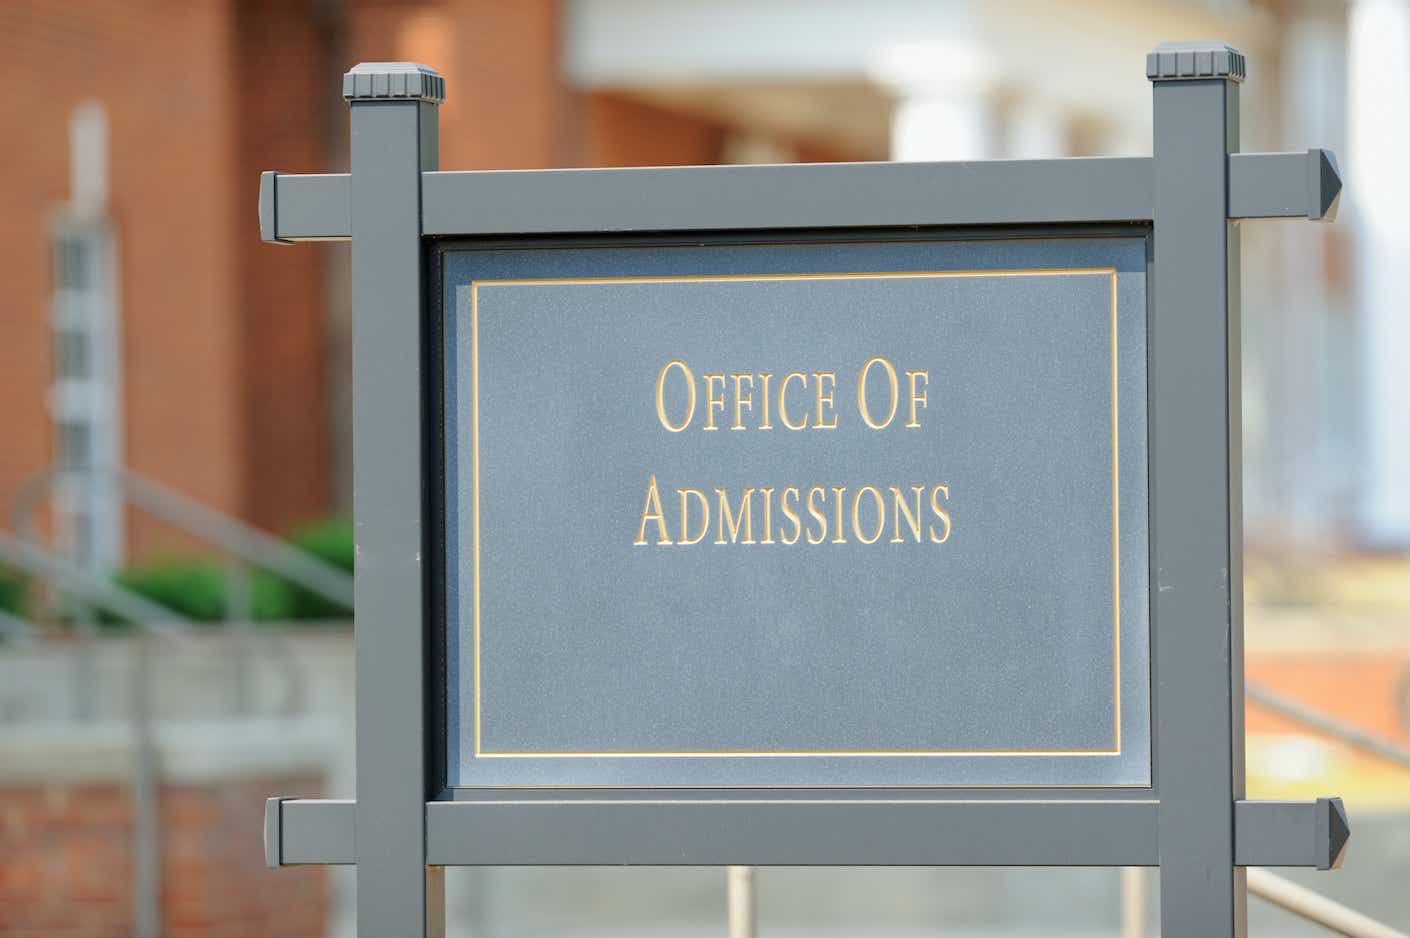 Office of admissions street sign